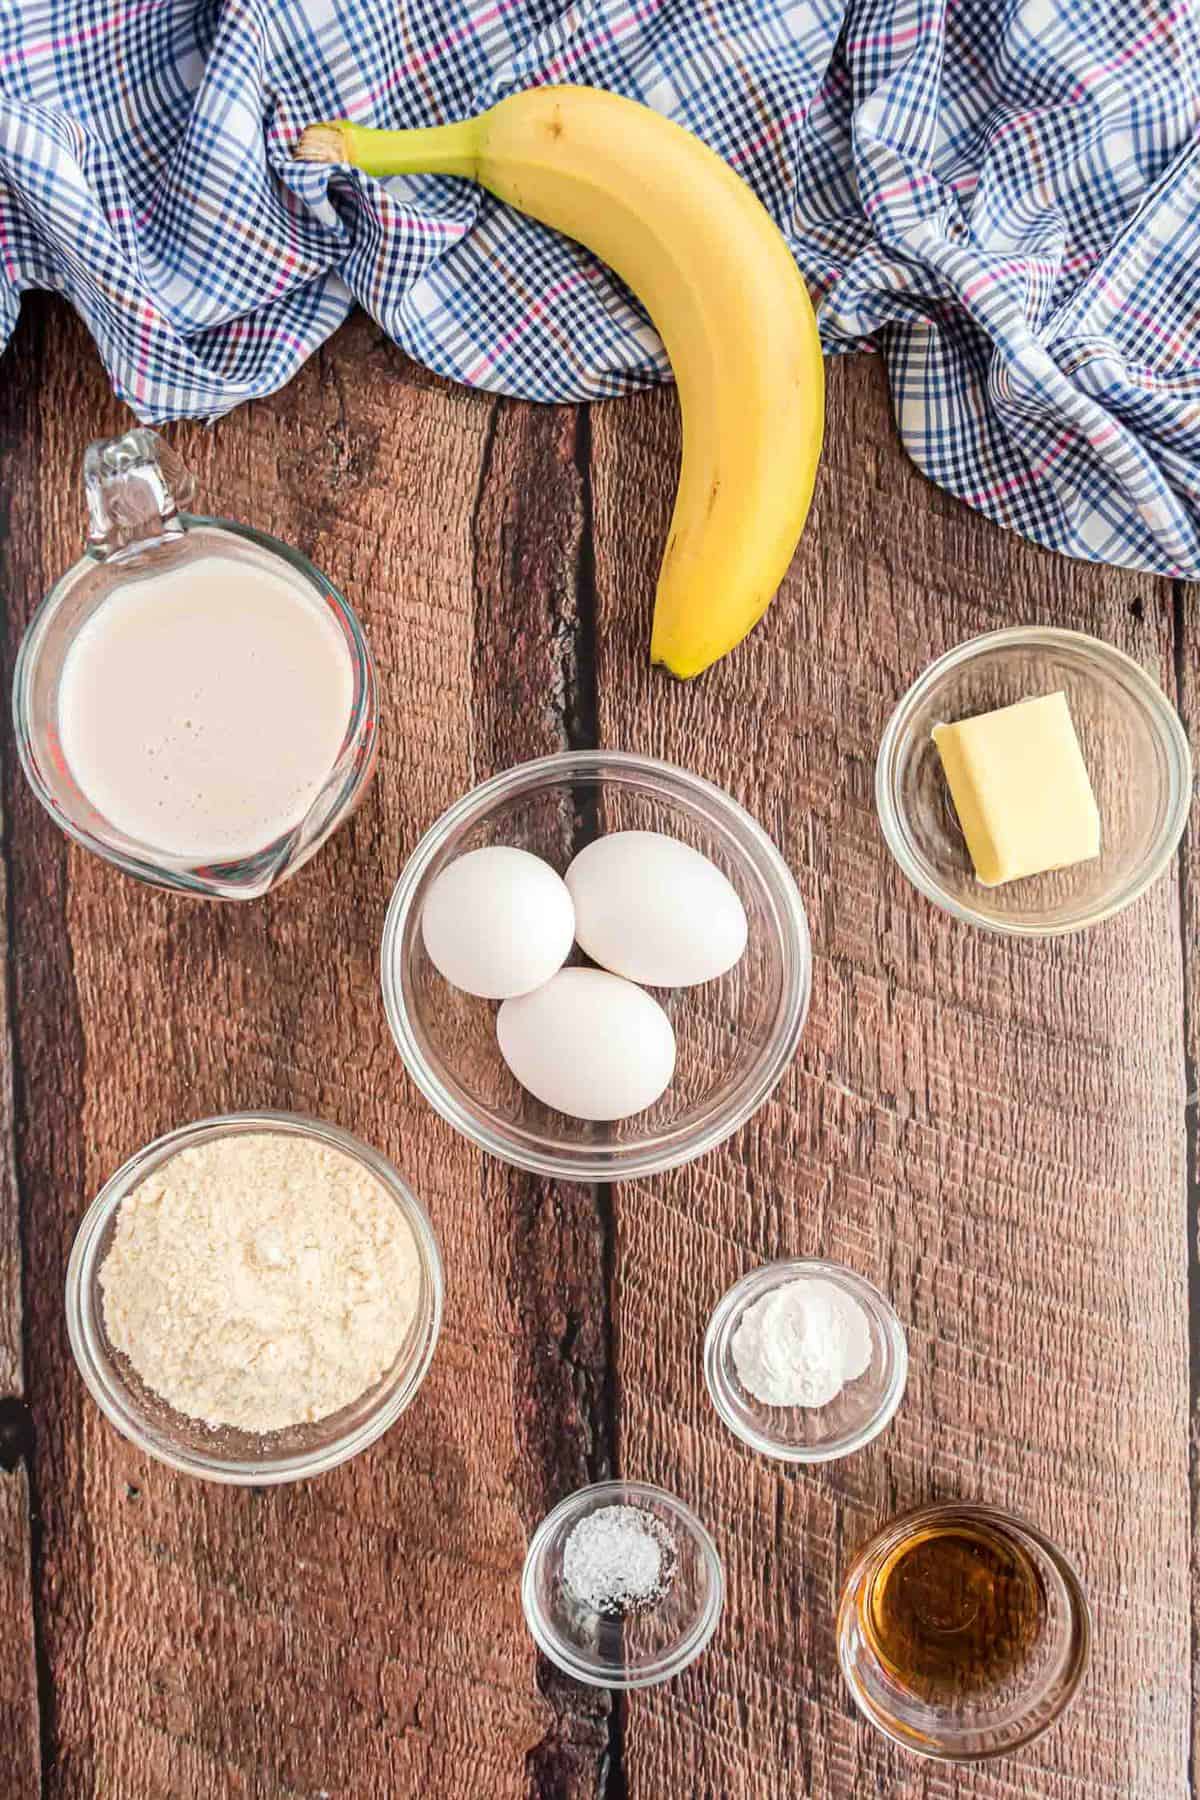 Overhead view of ingredients needed including a banana, eggs, and coconut flour.